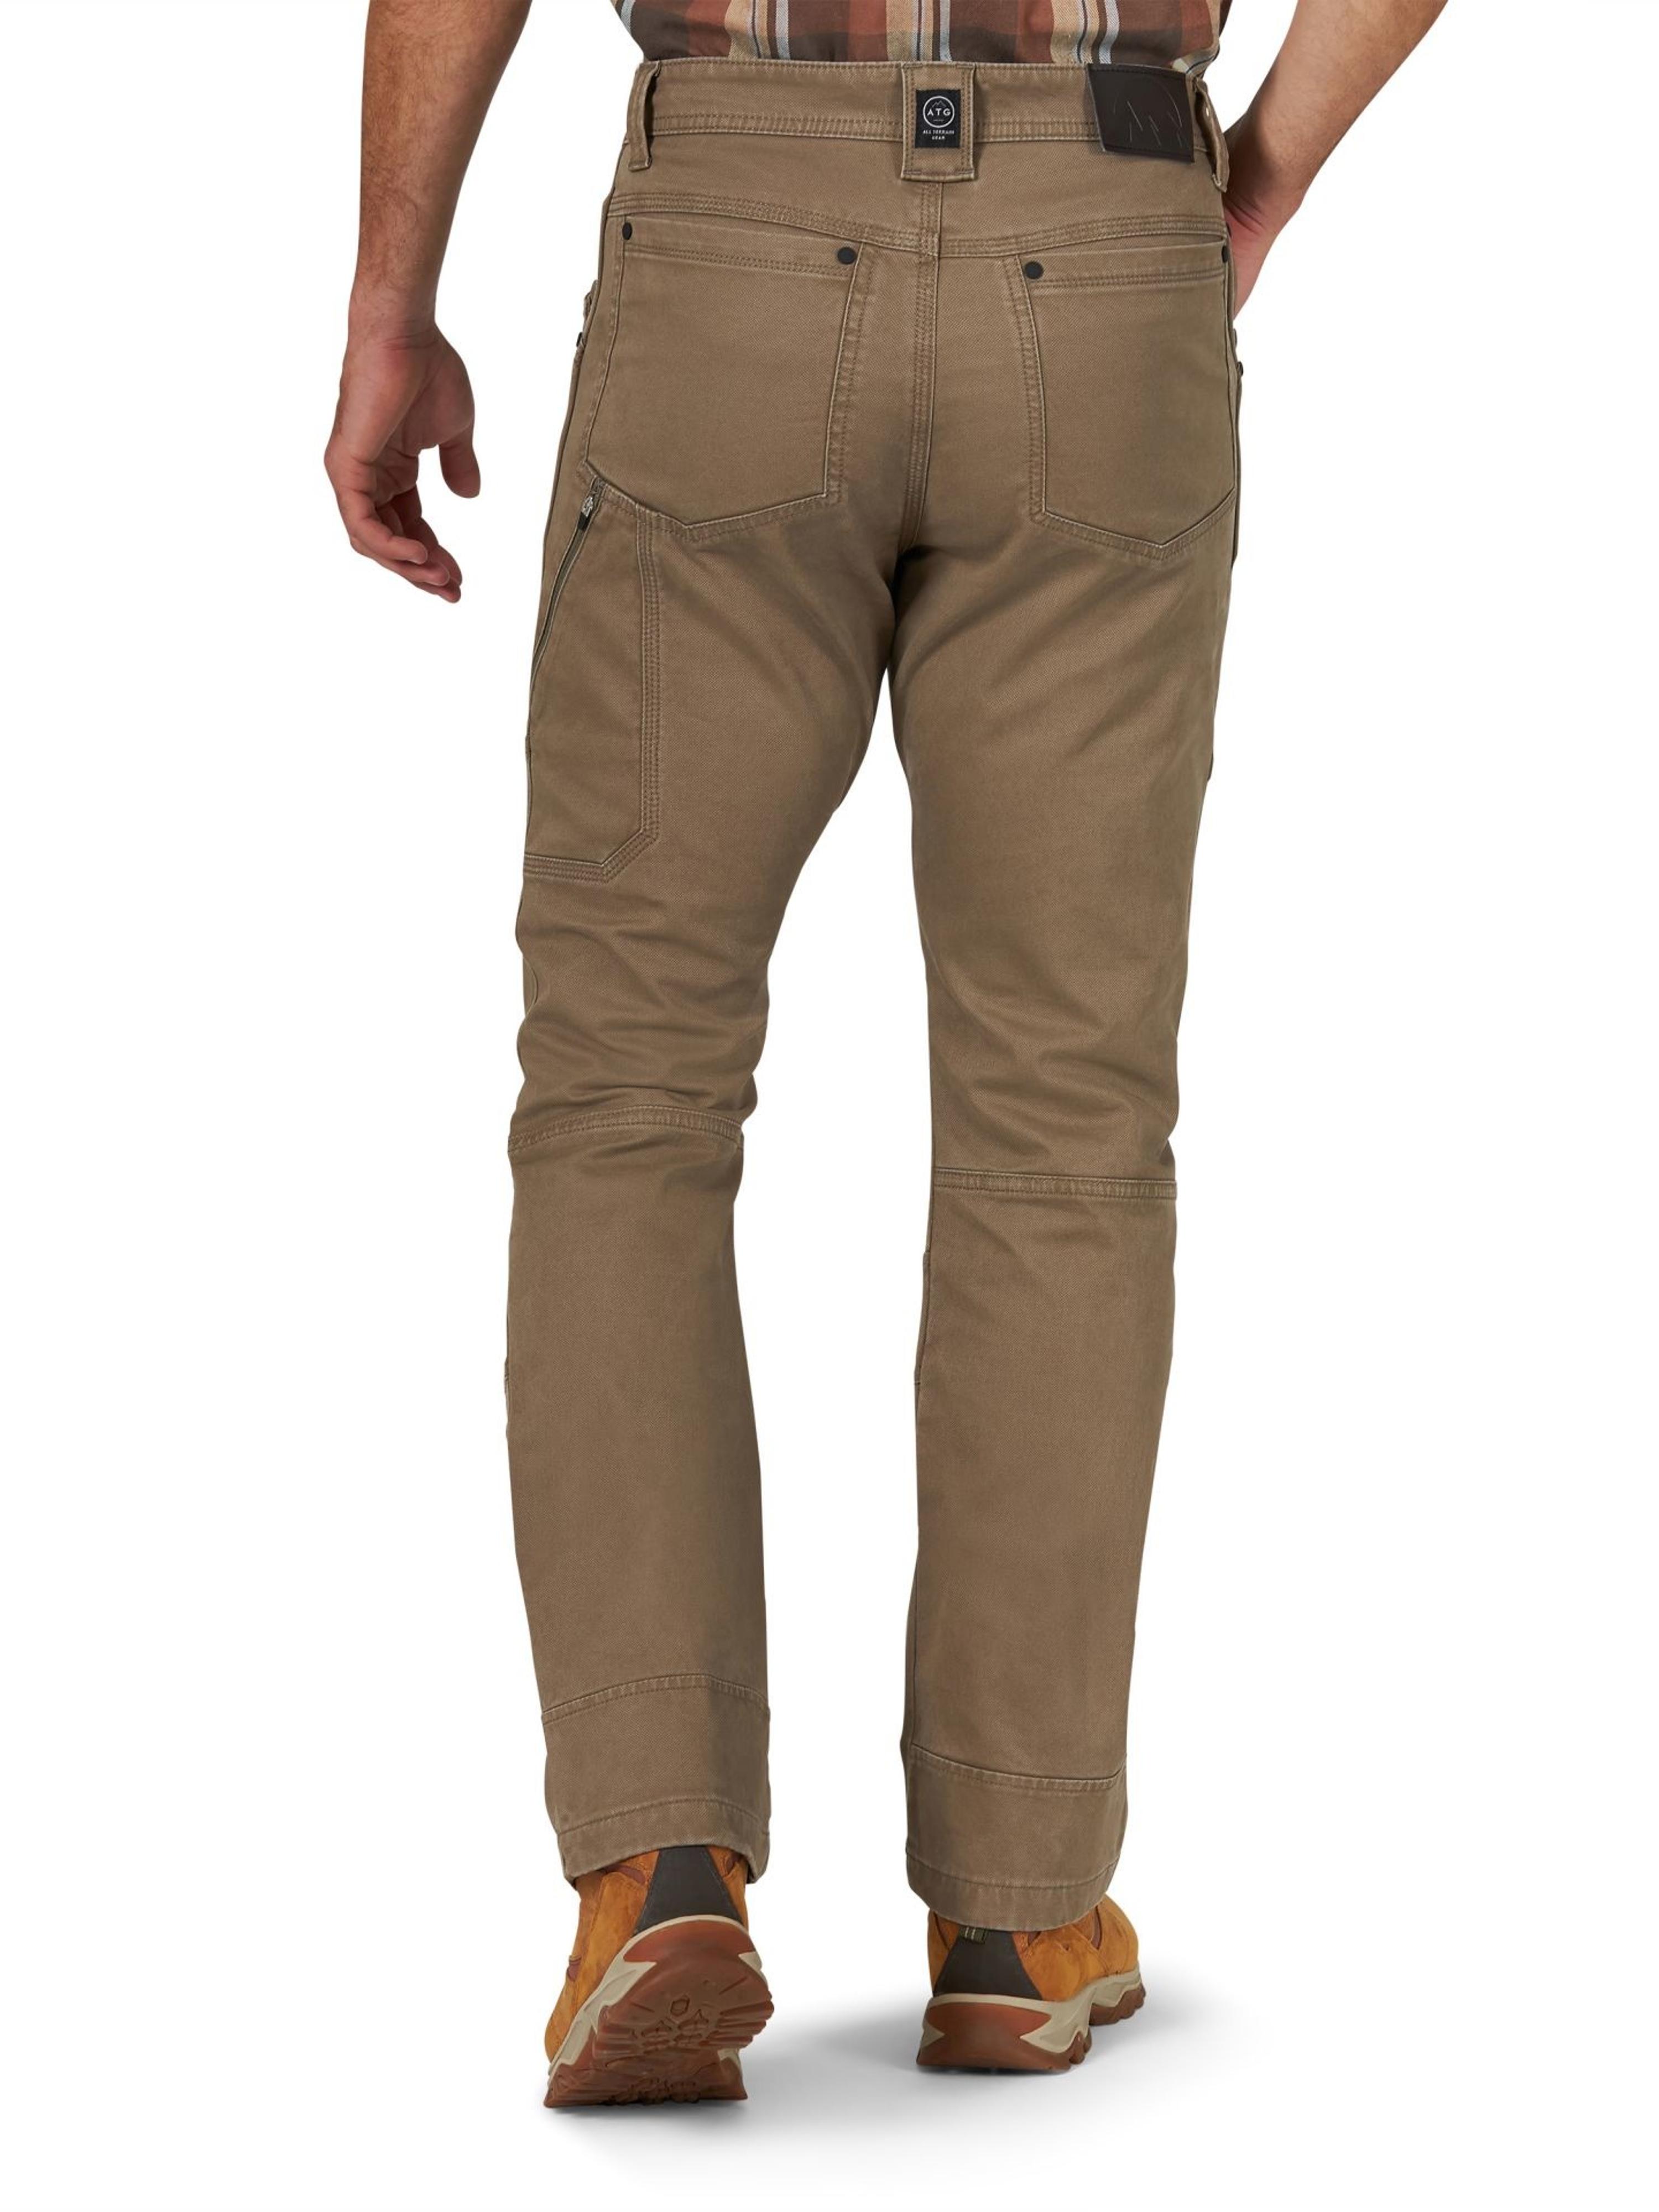 ATG by Wrangler Mens Reinforced Utility Pant | Renegade Stores